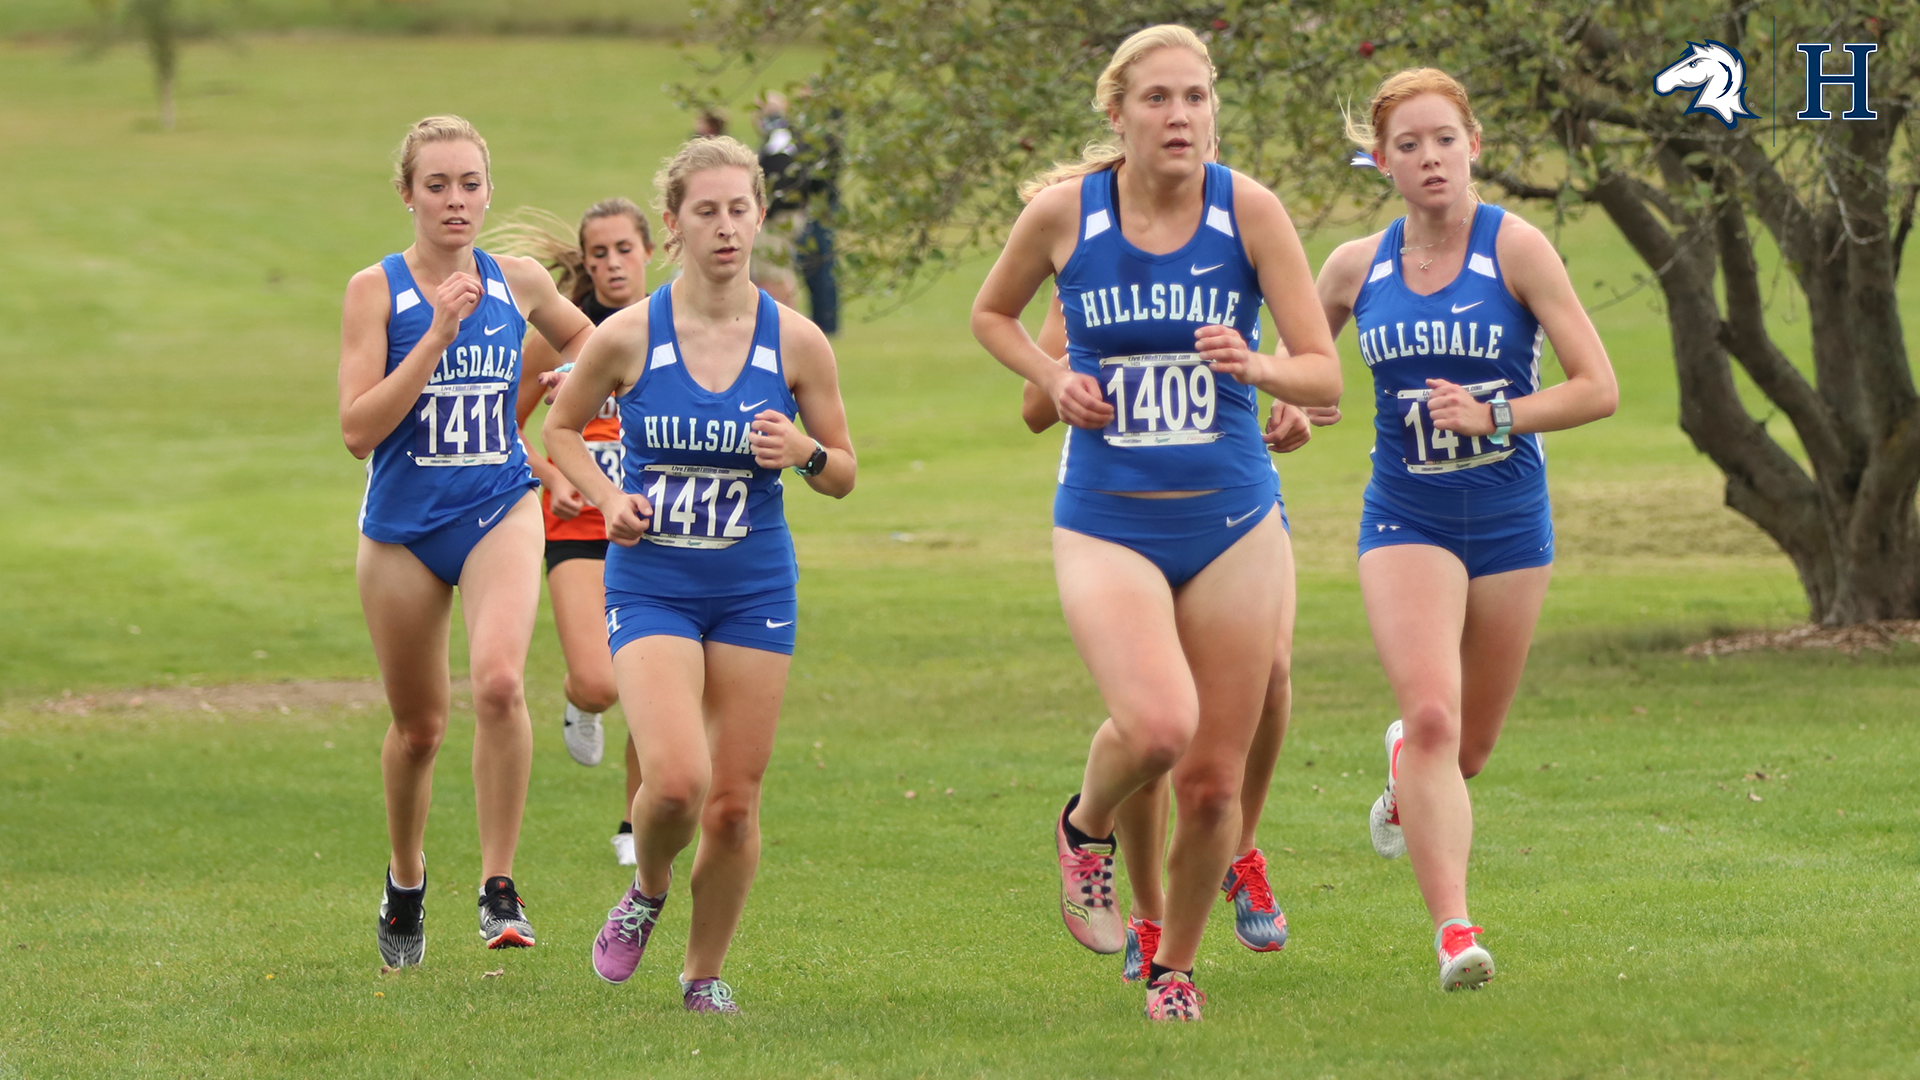 Near-perfect score gives Charger women second invitational win in 2020